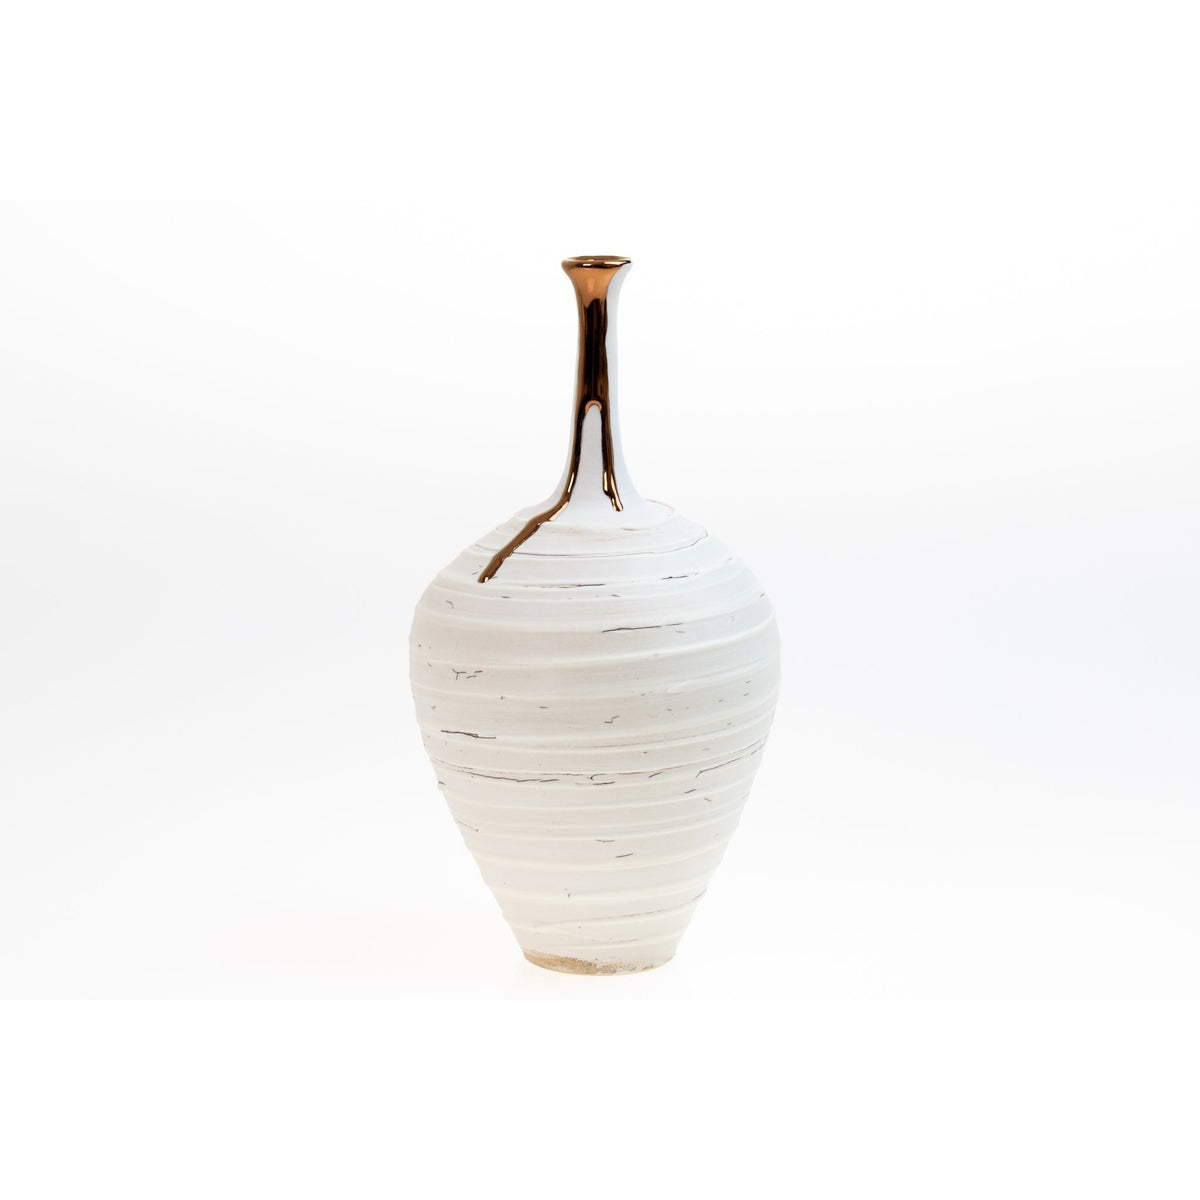 PGX32 Crackle Textured Long Necked Vase with Copper Lustre by Alex McCarthy, available at Padstow Gallery, Cornwall